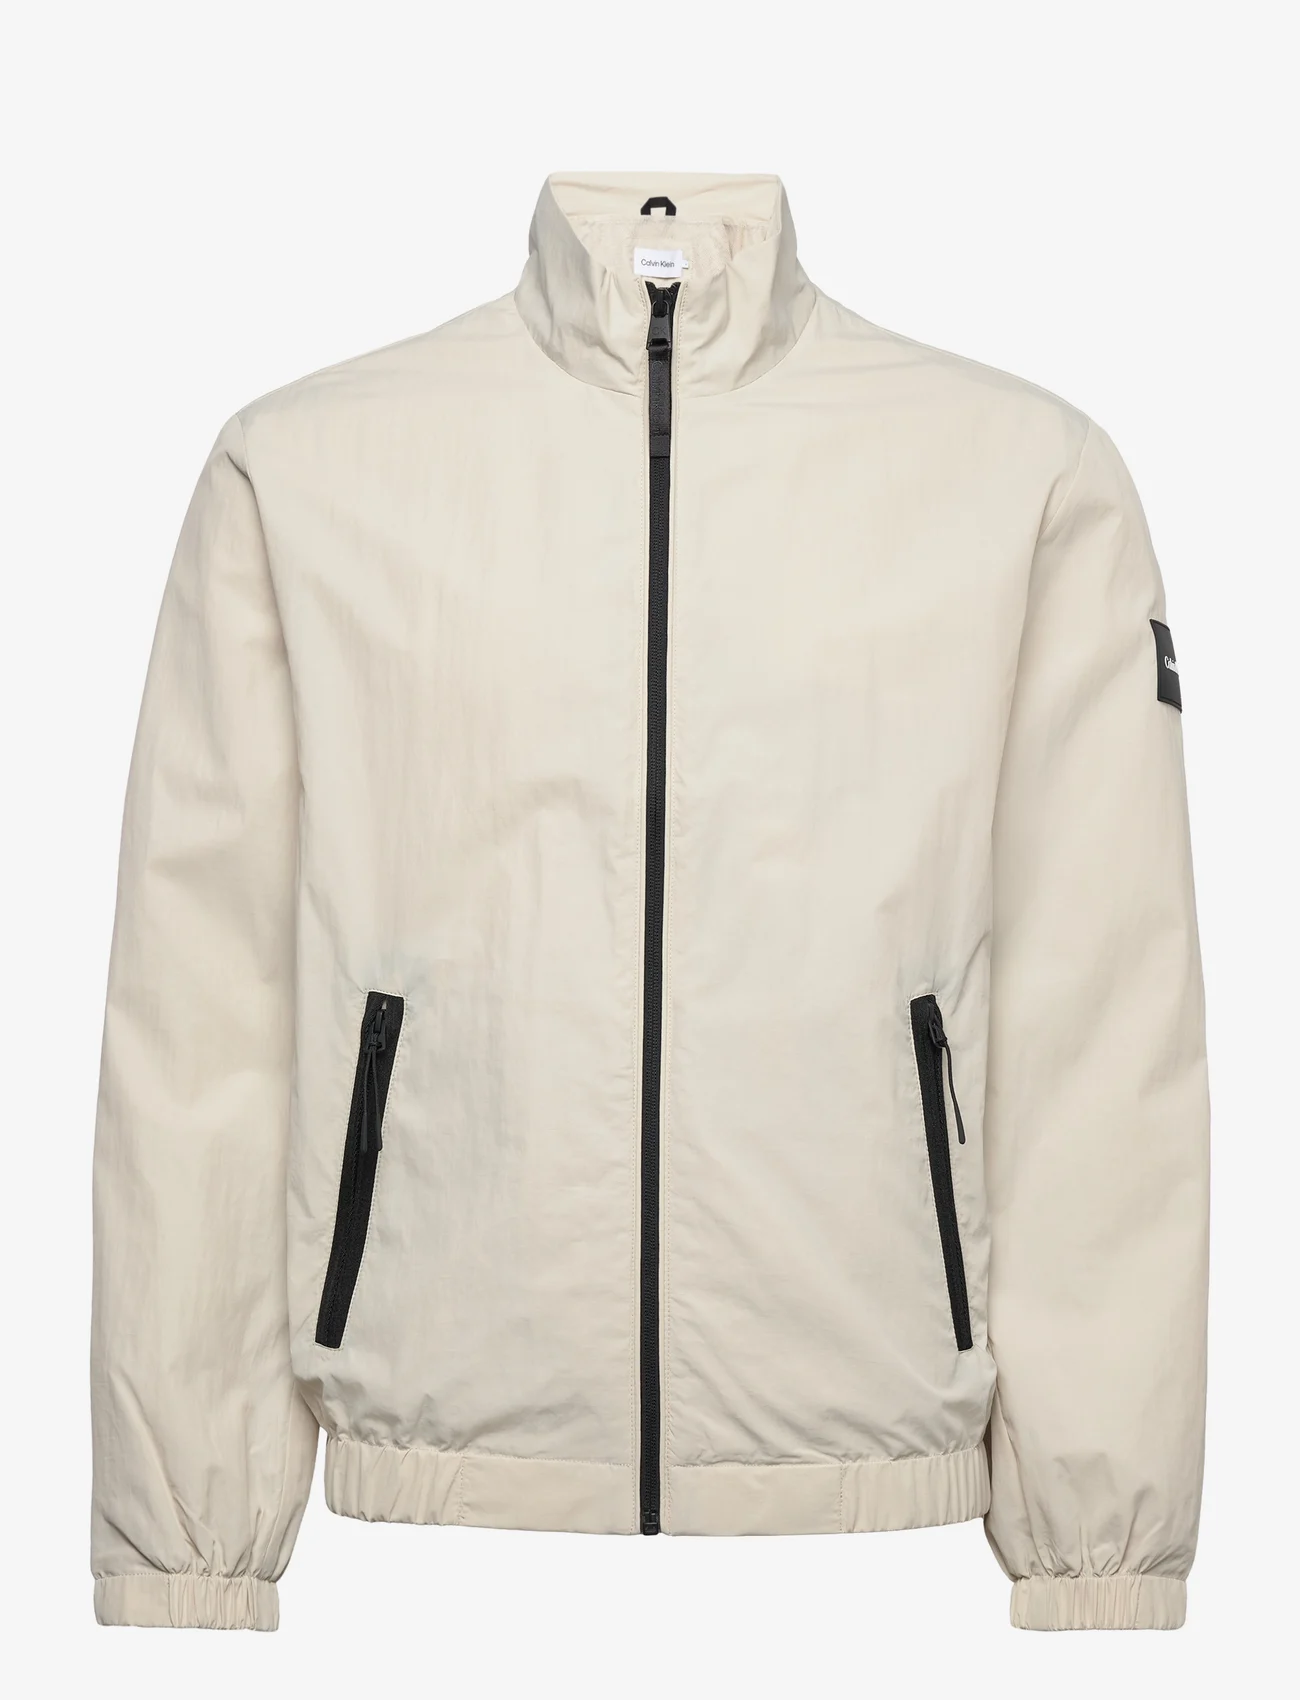 Calvin Klein Recycled Crinkle Nylon Blouson  €. Buy Light Jackets  from Calvin Klein online at . Fast delivery and easy returns